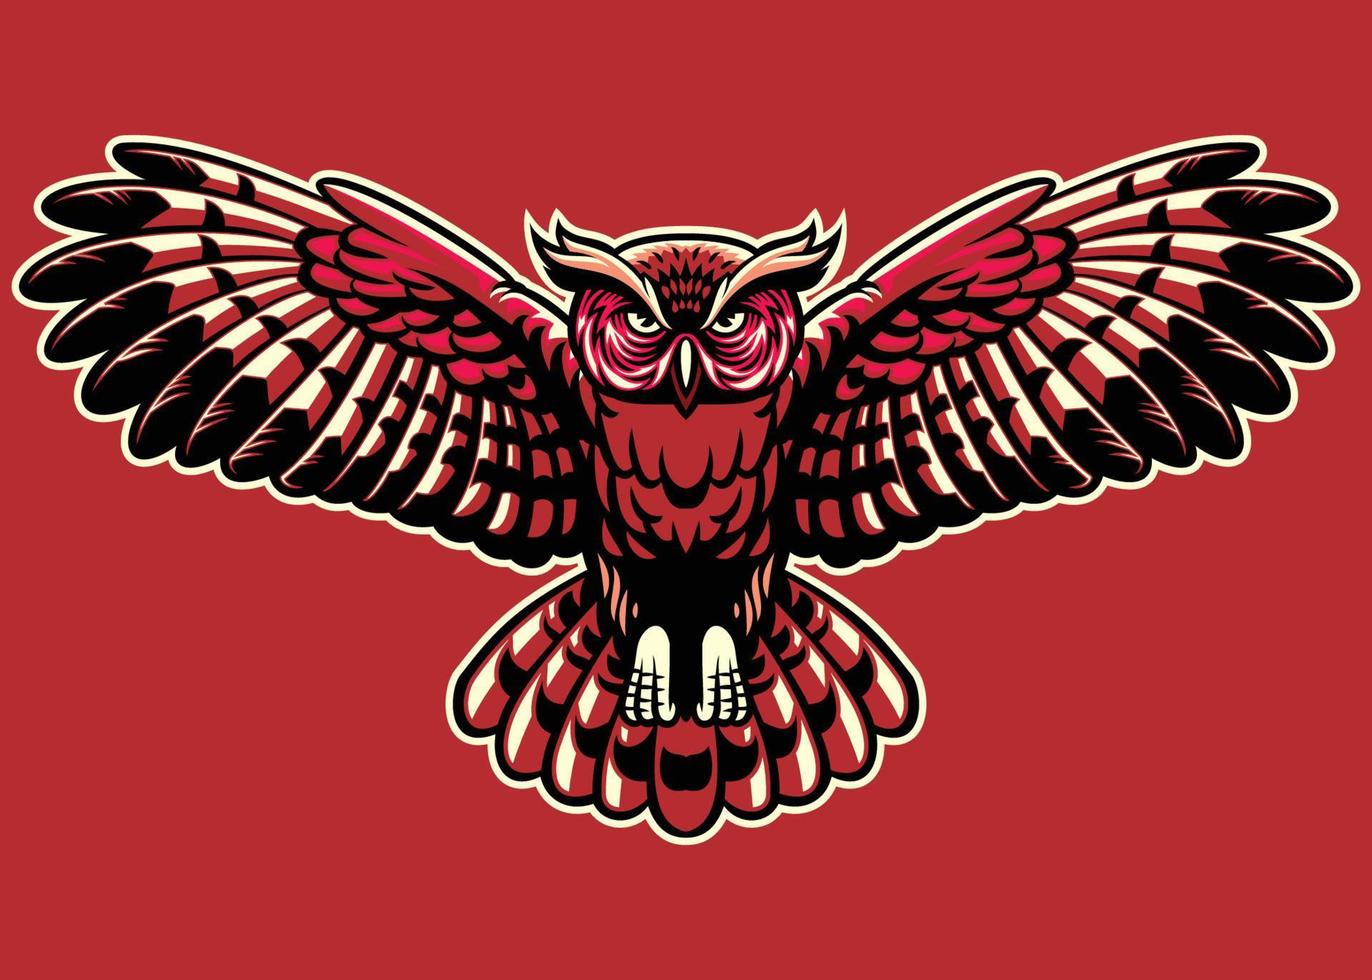 Owl spreading the wings vector